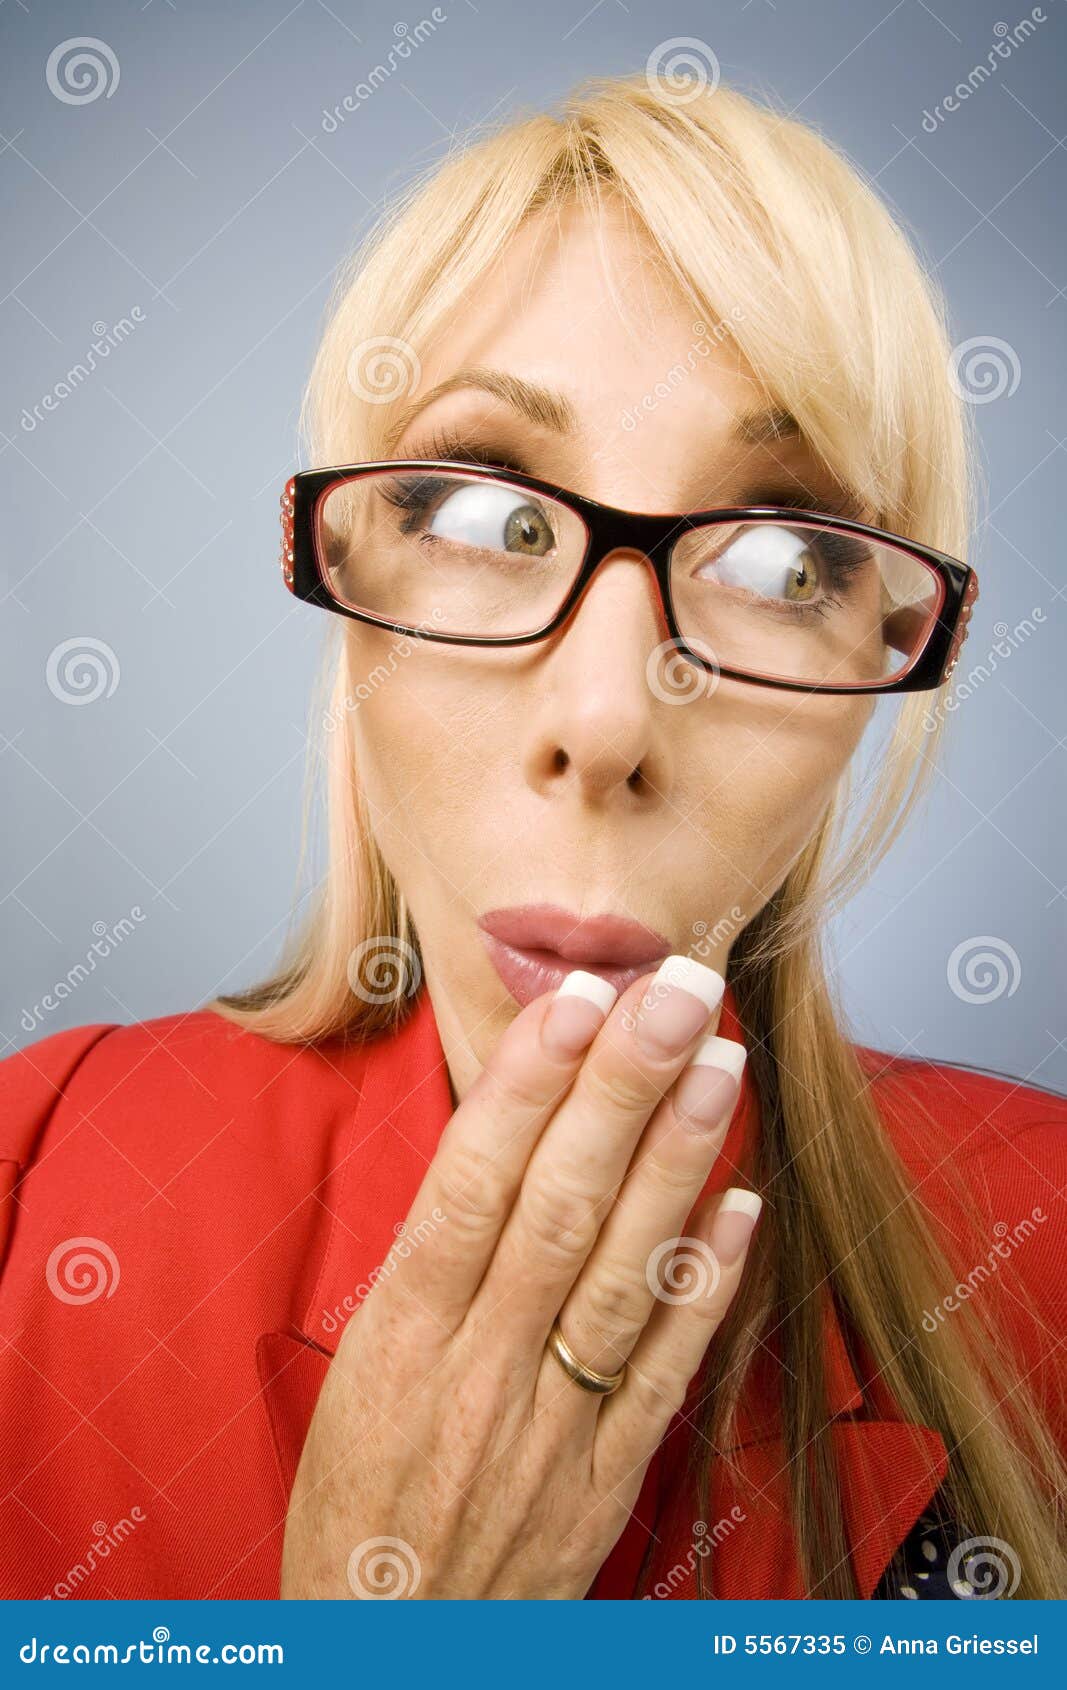 Shocked Woman In Red Making A Funny Face Royalty Free Stock Photo